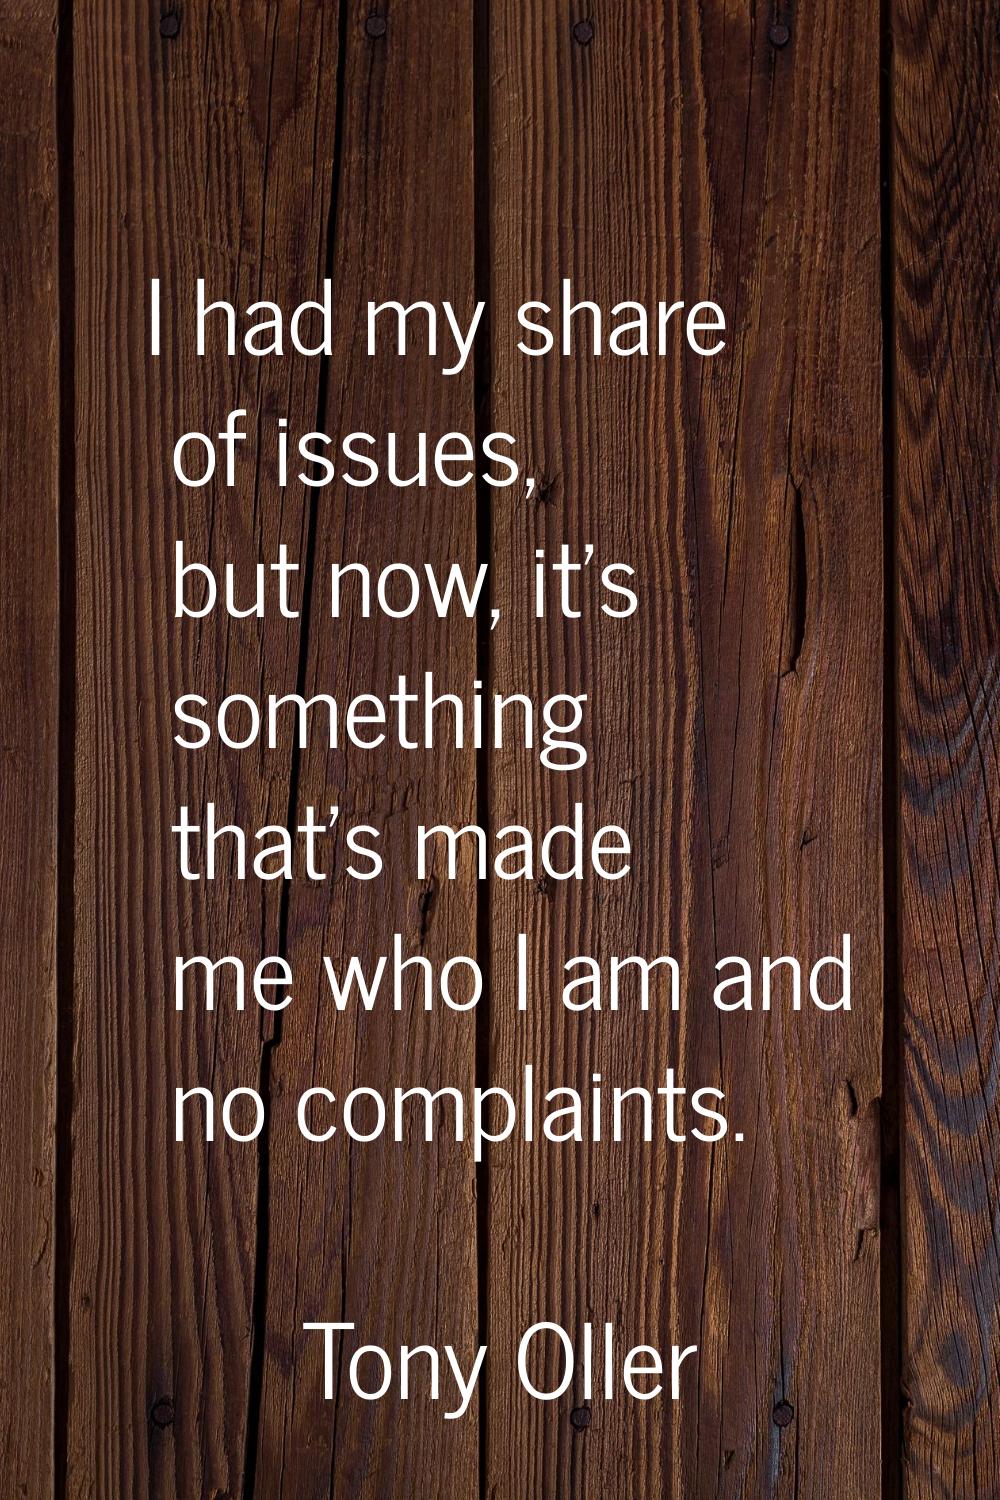 I had my share of issues, but now, it's something that's made me who I am and no complaints.